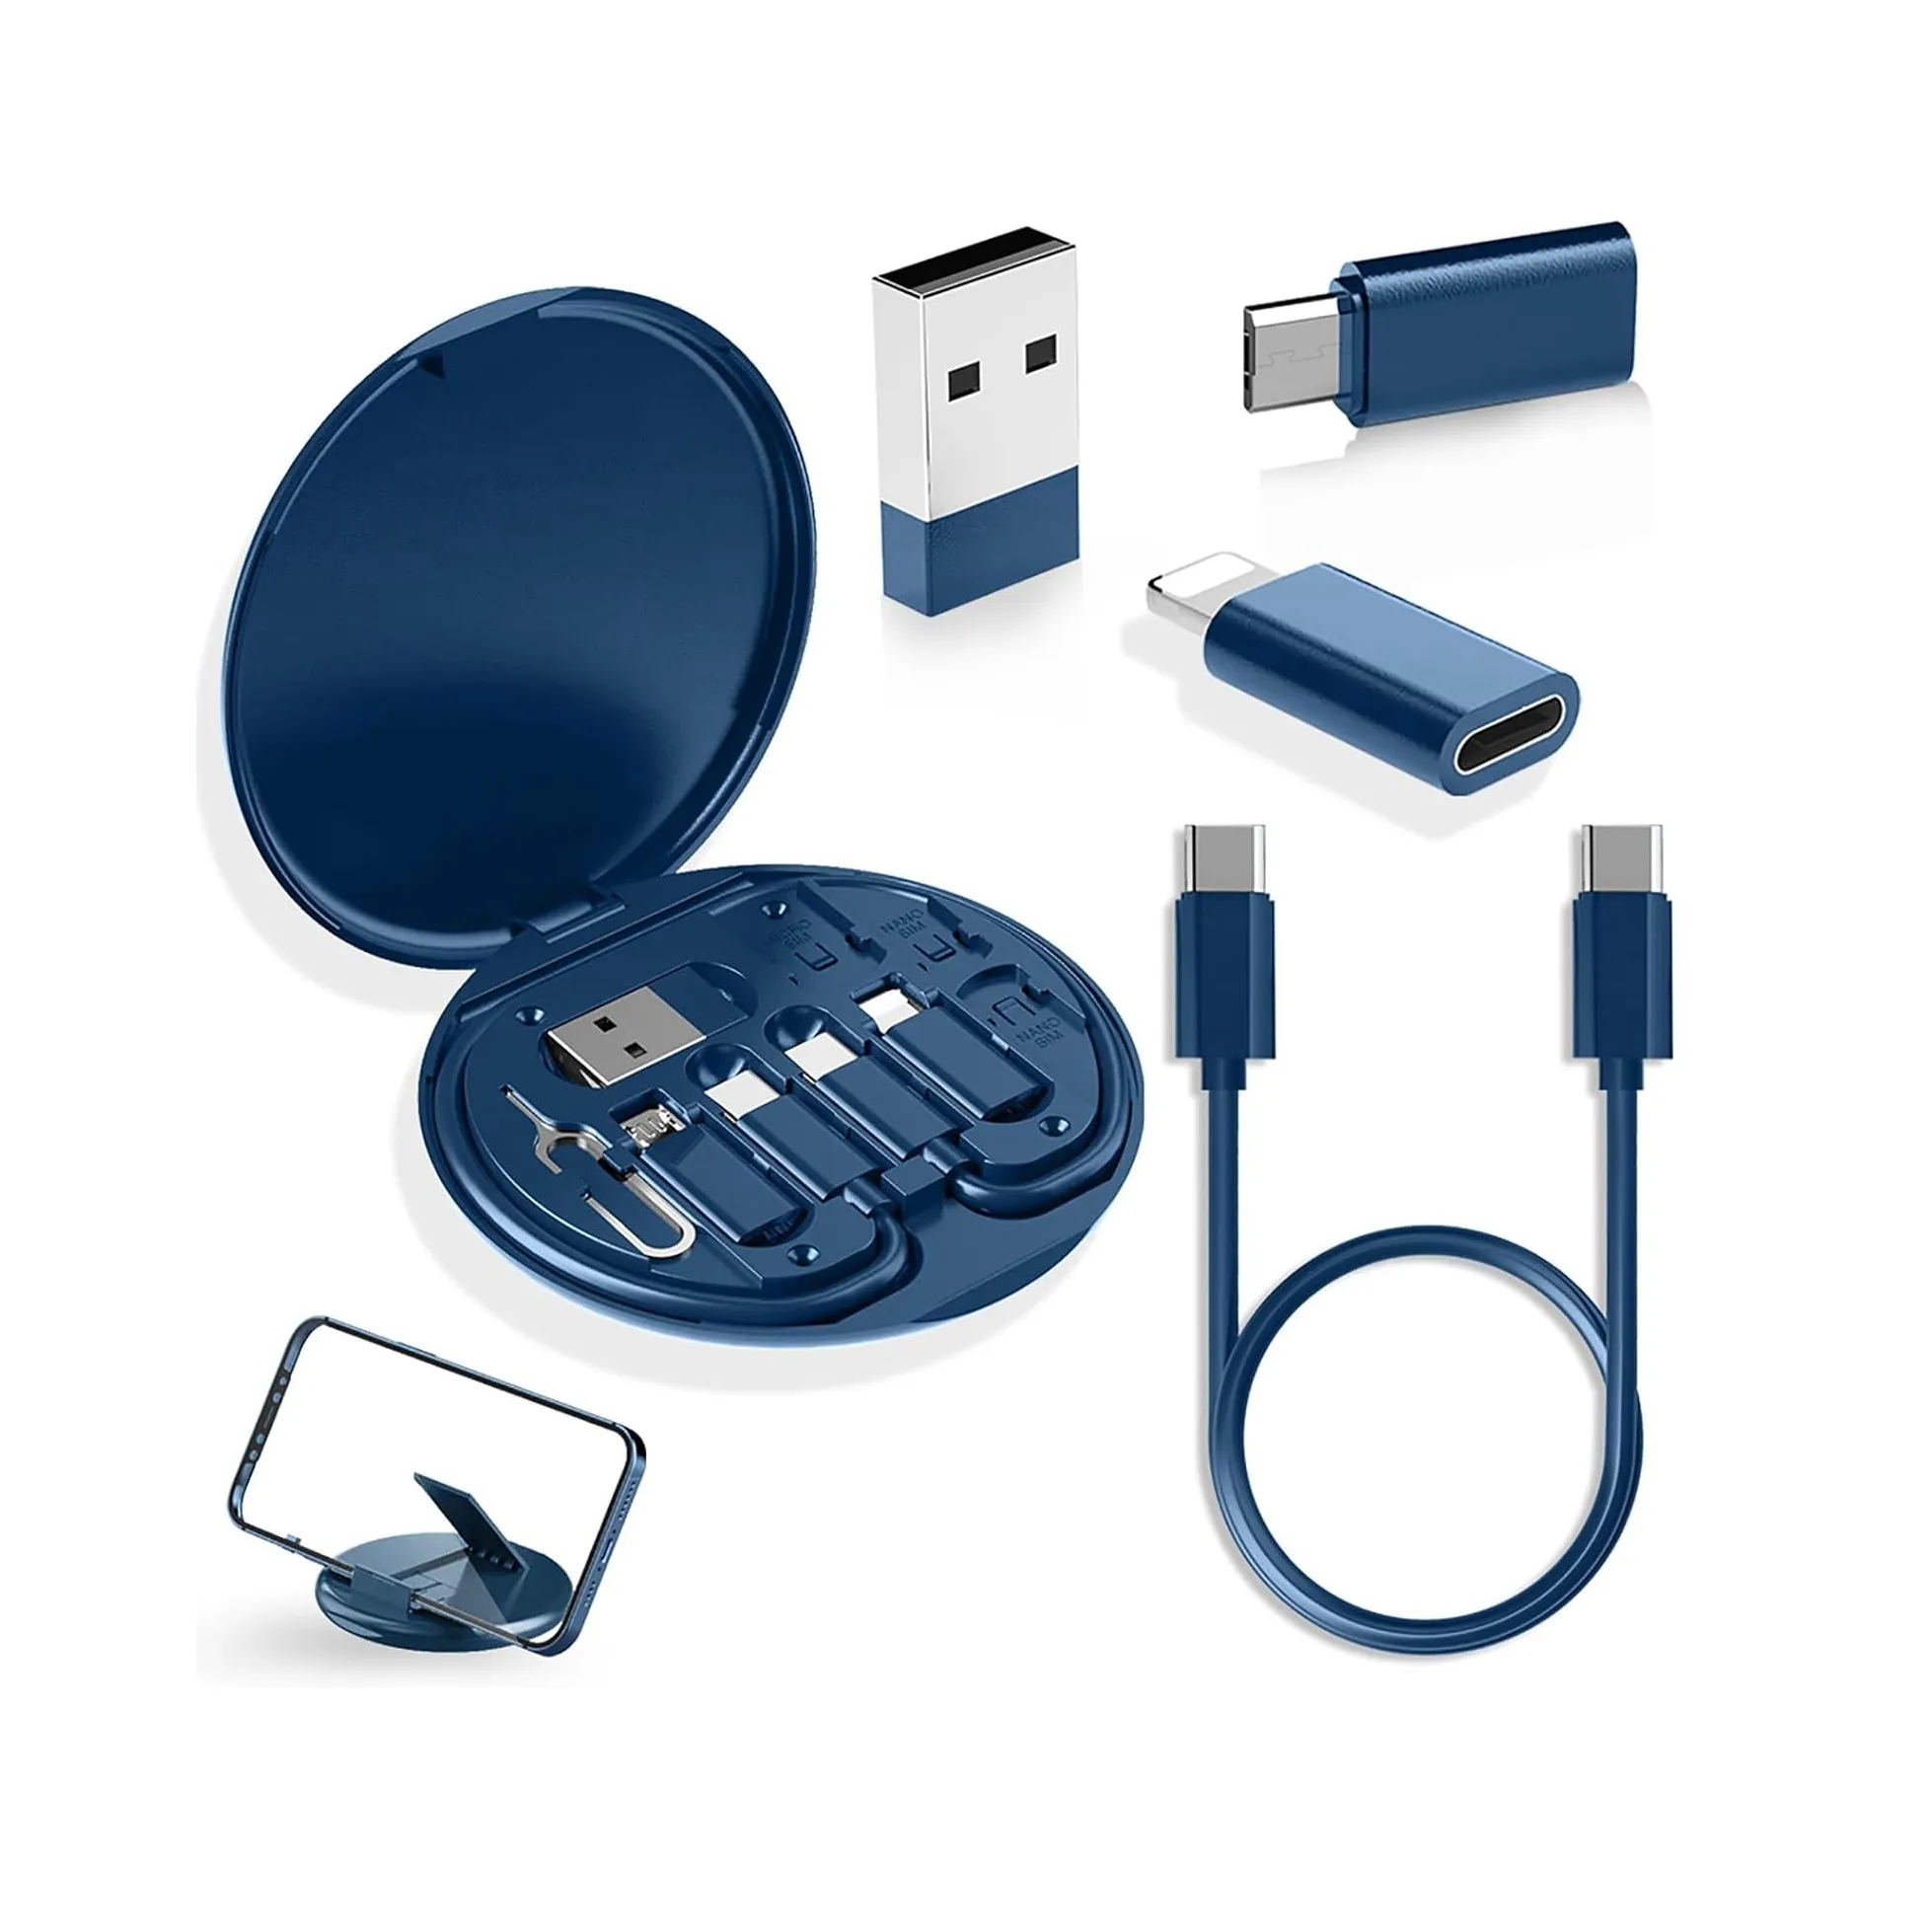 Data Cable Set USB C Adapter Kit, Multi Charging Cable Case Converter, Travel Data Cable Set Contains Card Storage